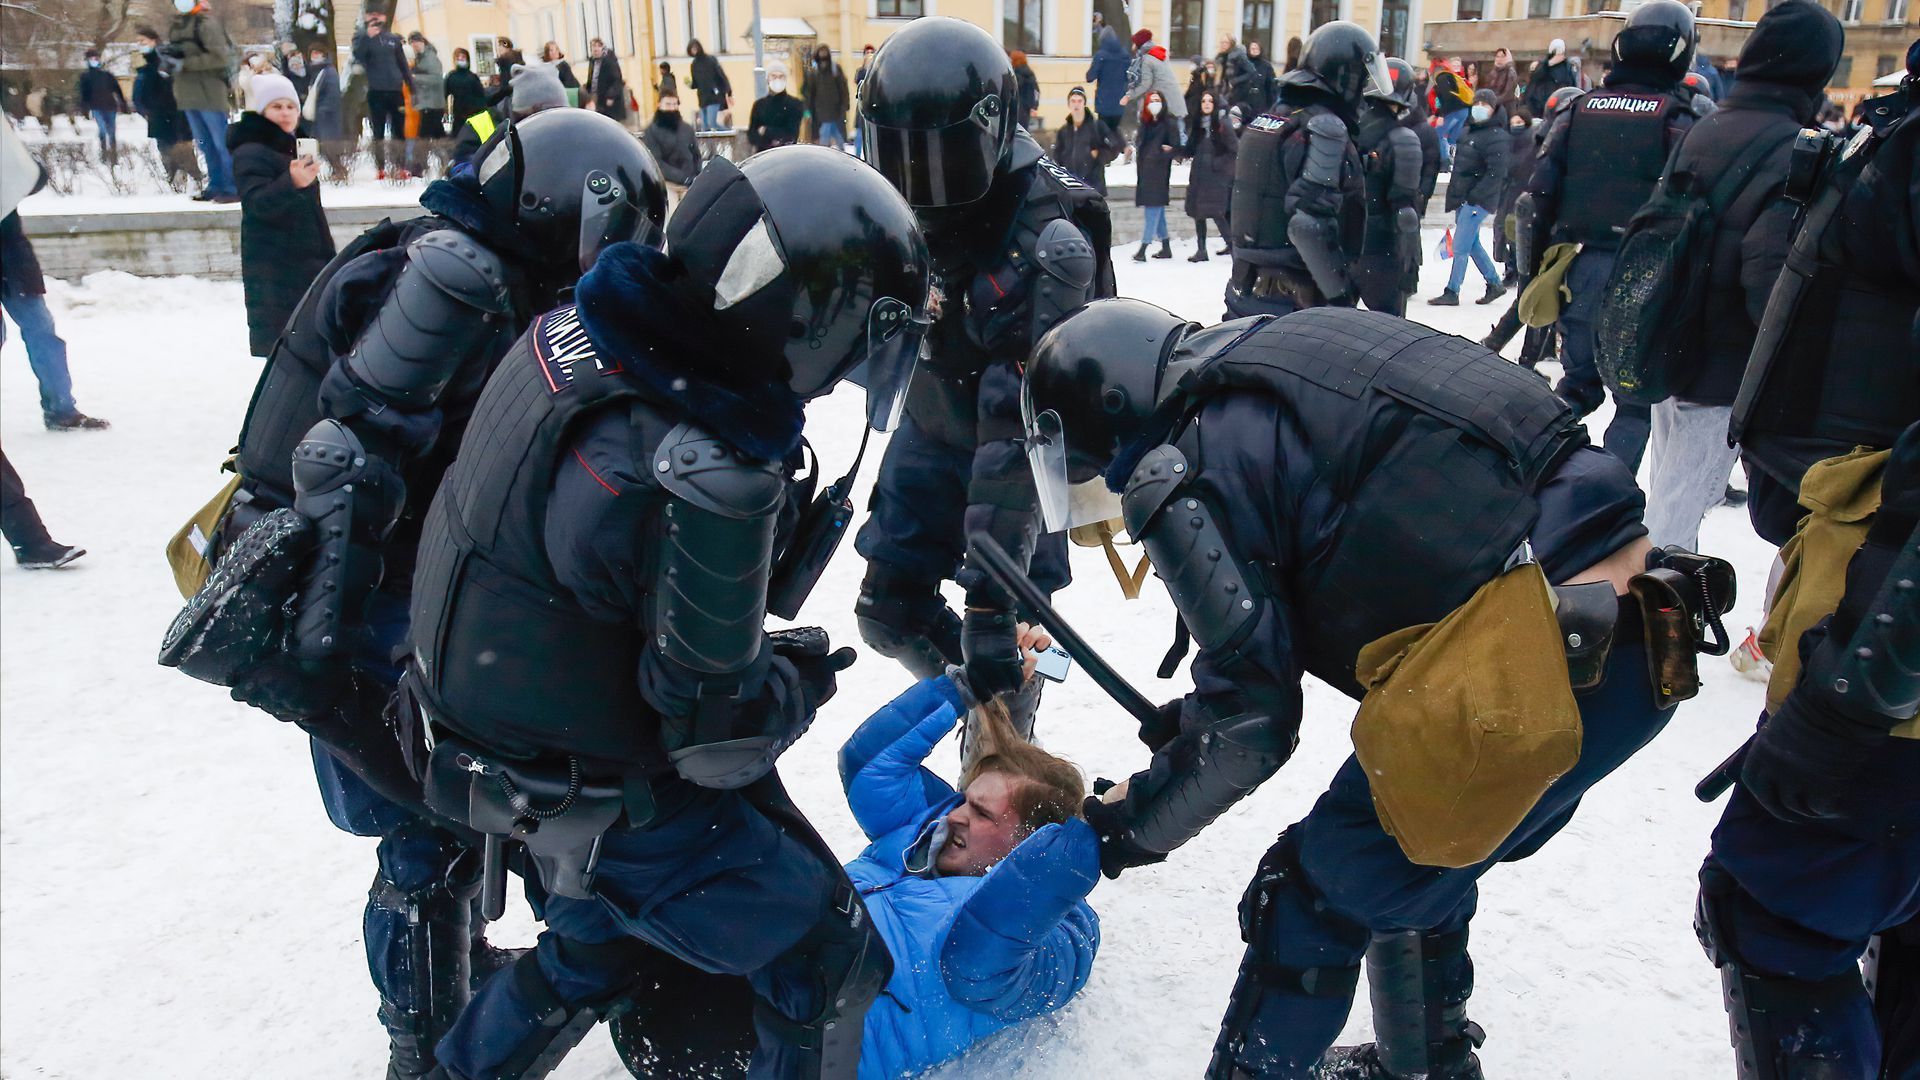 Police officers detain a protester during a demonstration in St. Petersburg Sunday. Demonstrators rallied despite police arresting thousands of protesters last week.